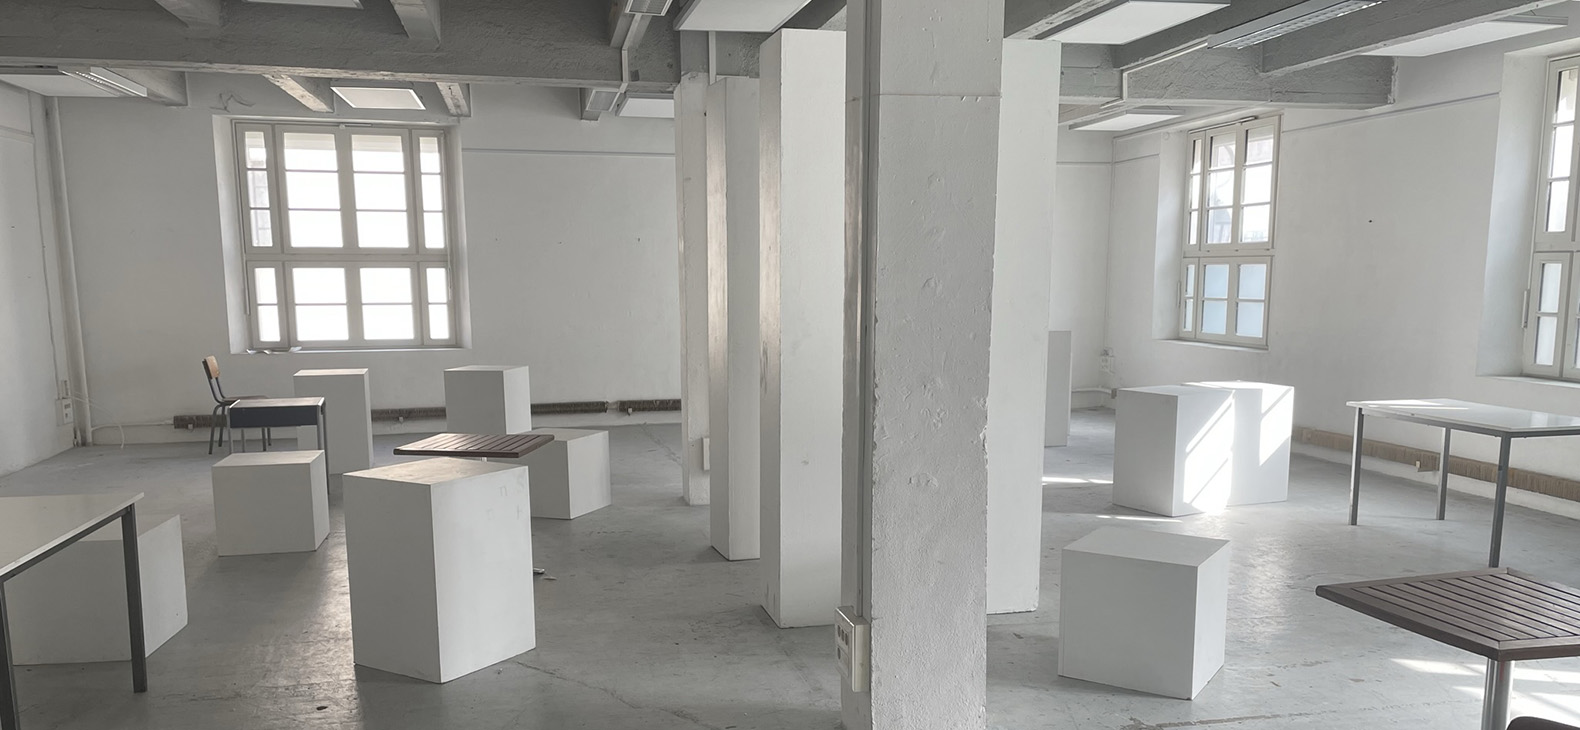 Schafhof Residency Program / District of Upper Bavaria: Focus > Orléans; Image: Room view of an exhibition space; large white cubes and cuboids distributed in the room.